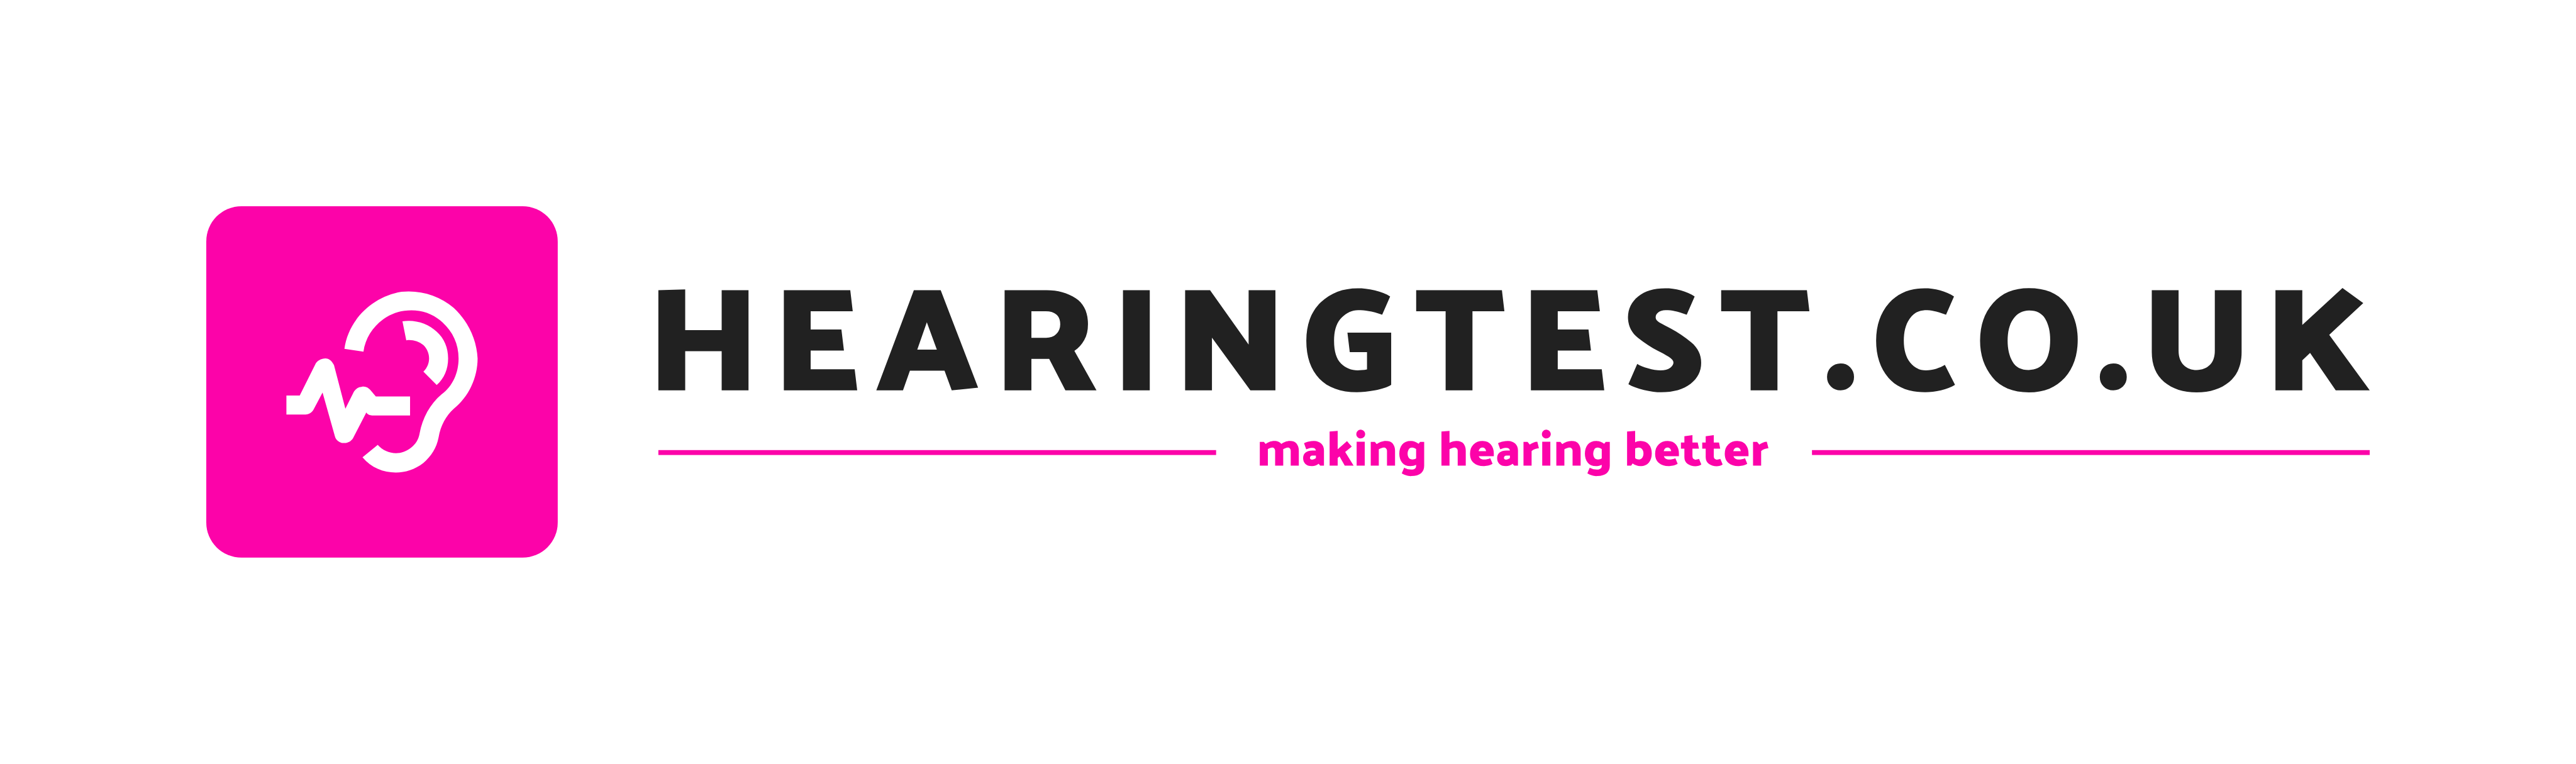 Free Hearing Test for Adults in Dunston | Hearingtest.co.uk